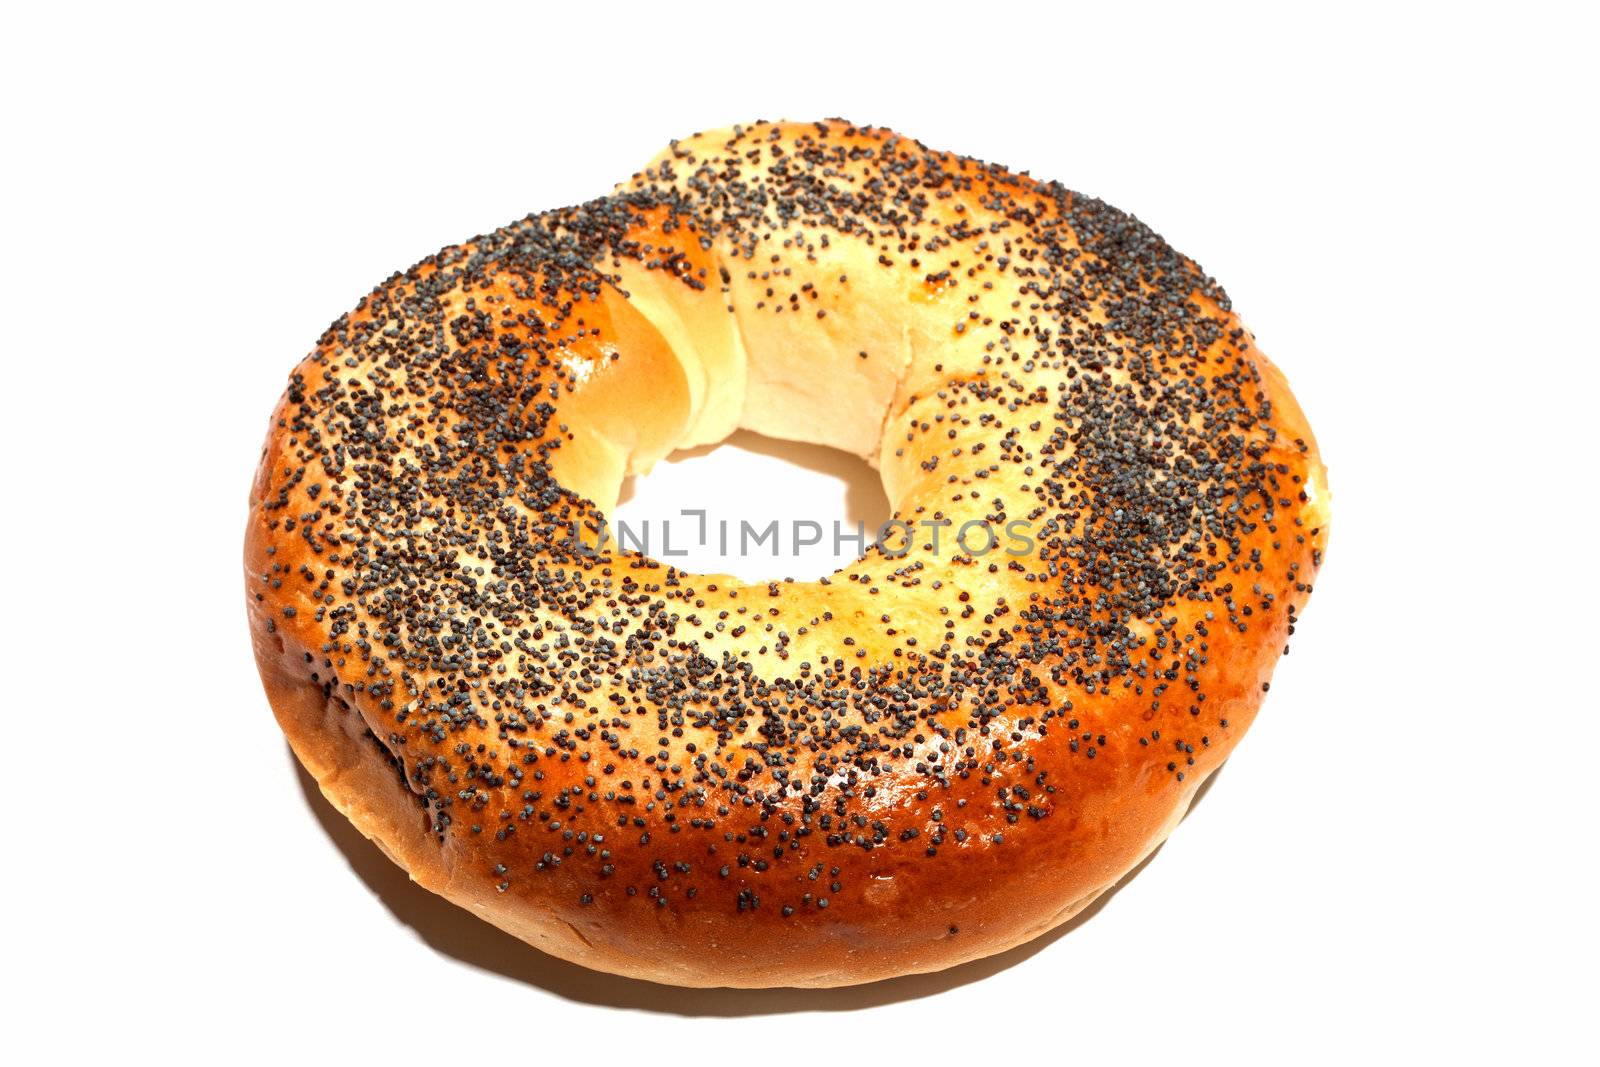 bagels with poppy seeds by sfinks